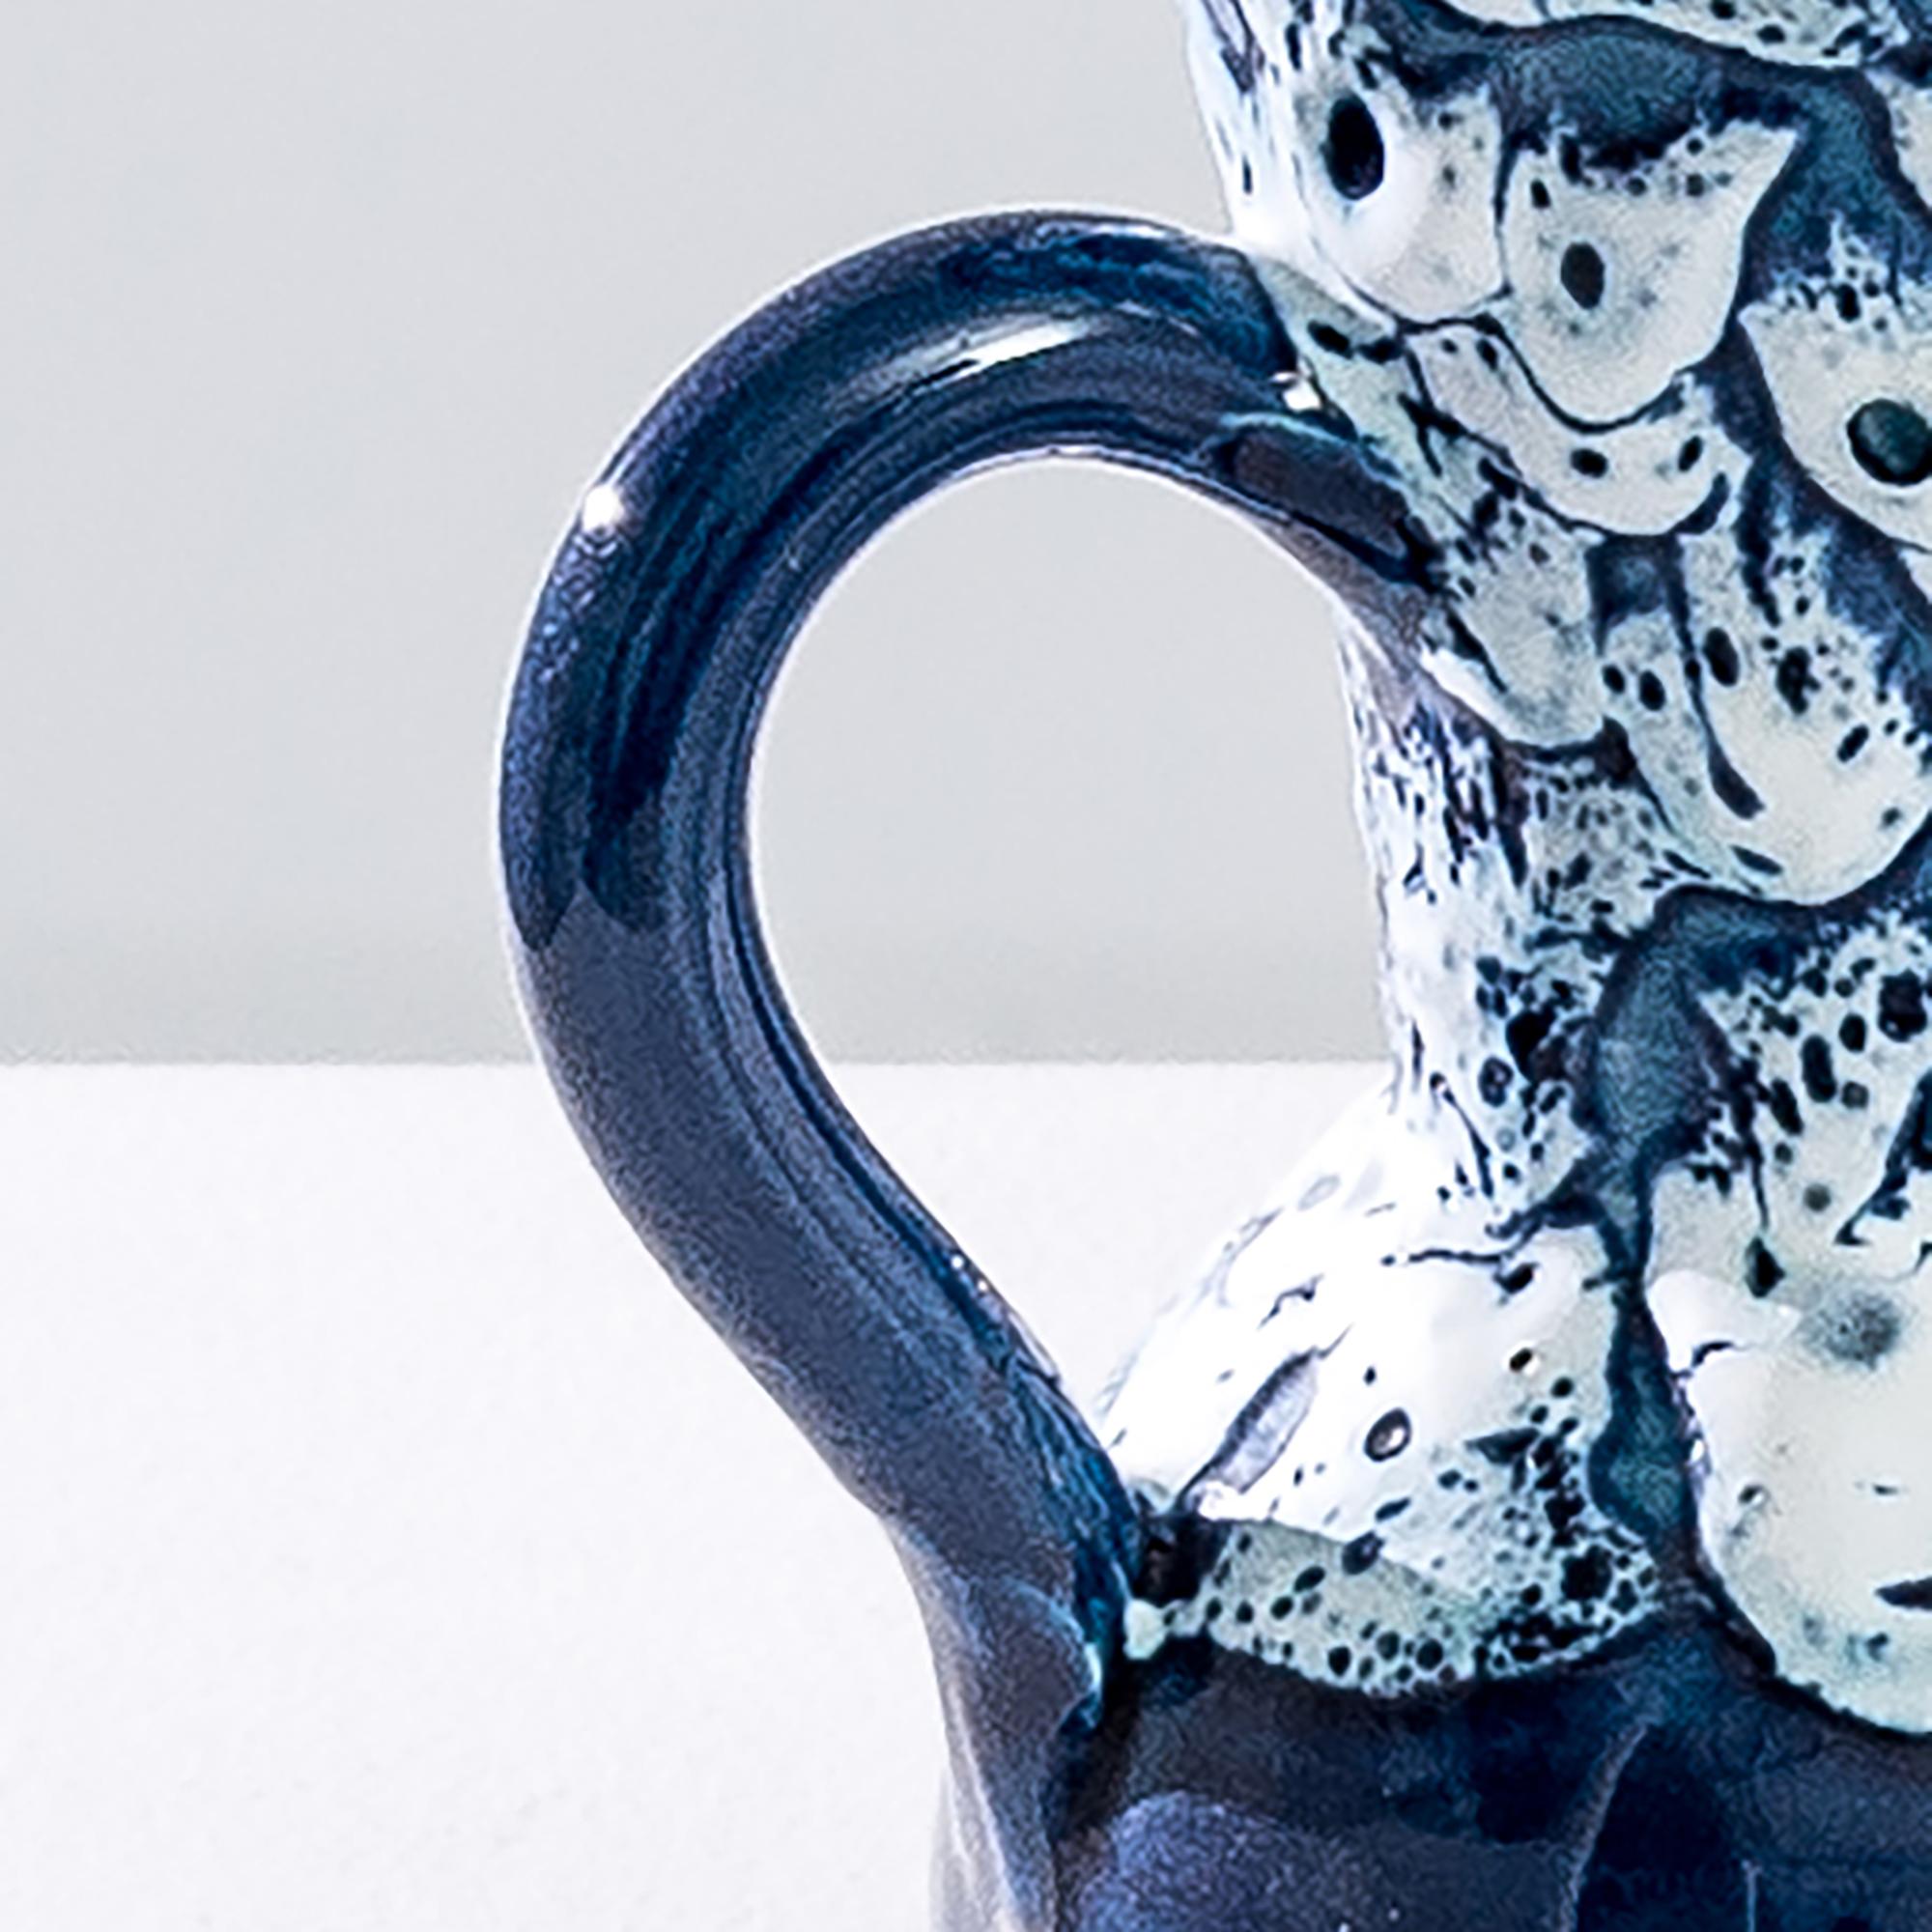 This ceramic vase was produced in Europe in the 20th century. A large neck with two loop handles gives the jug a unique shape, complemented by the round base. The glazed surface is covered with mottled abstract patterns in white and dark blue tones.